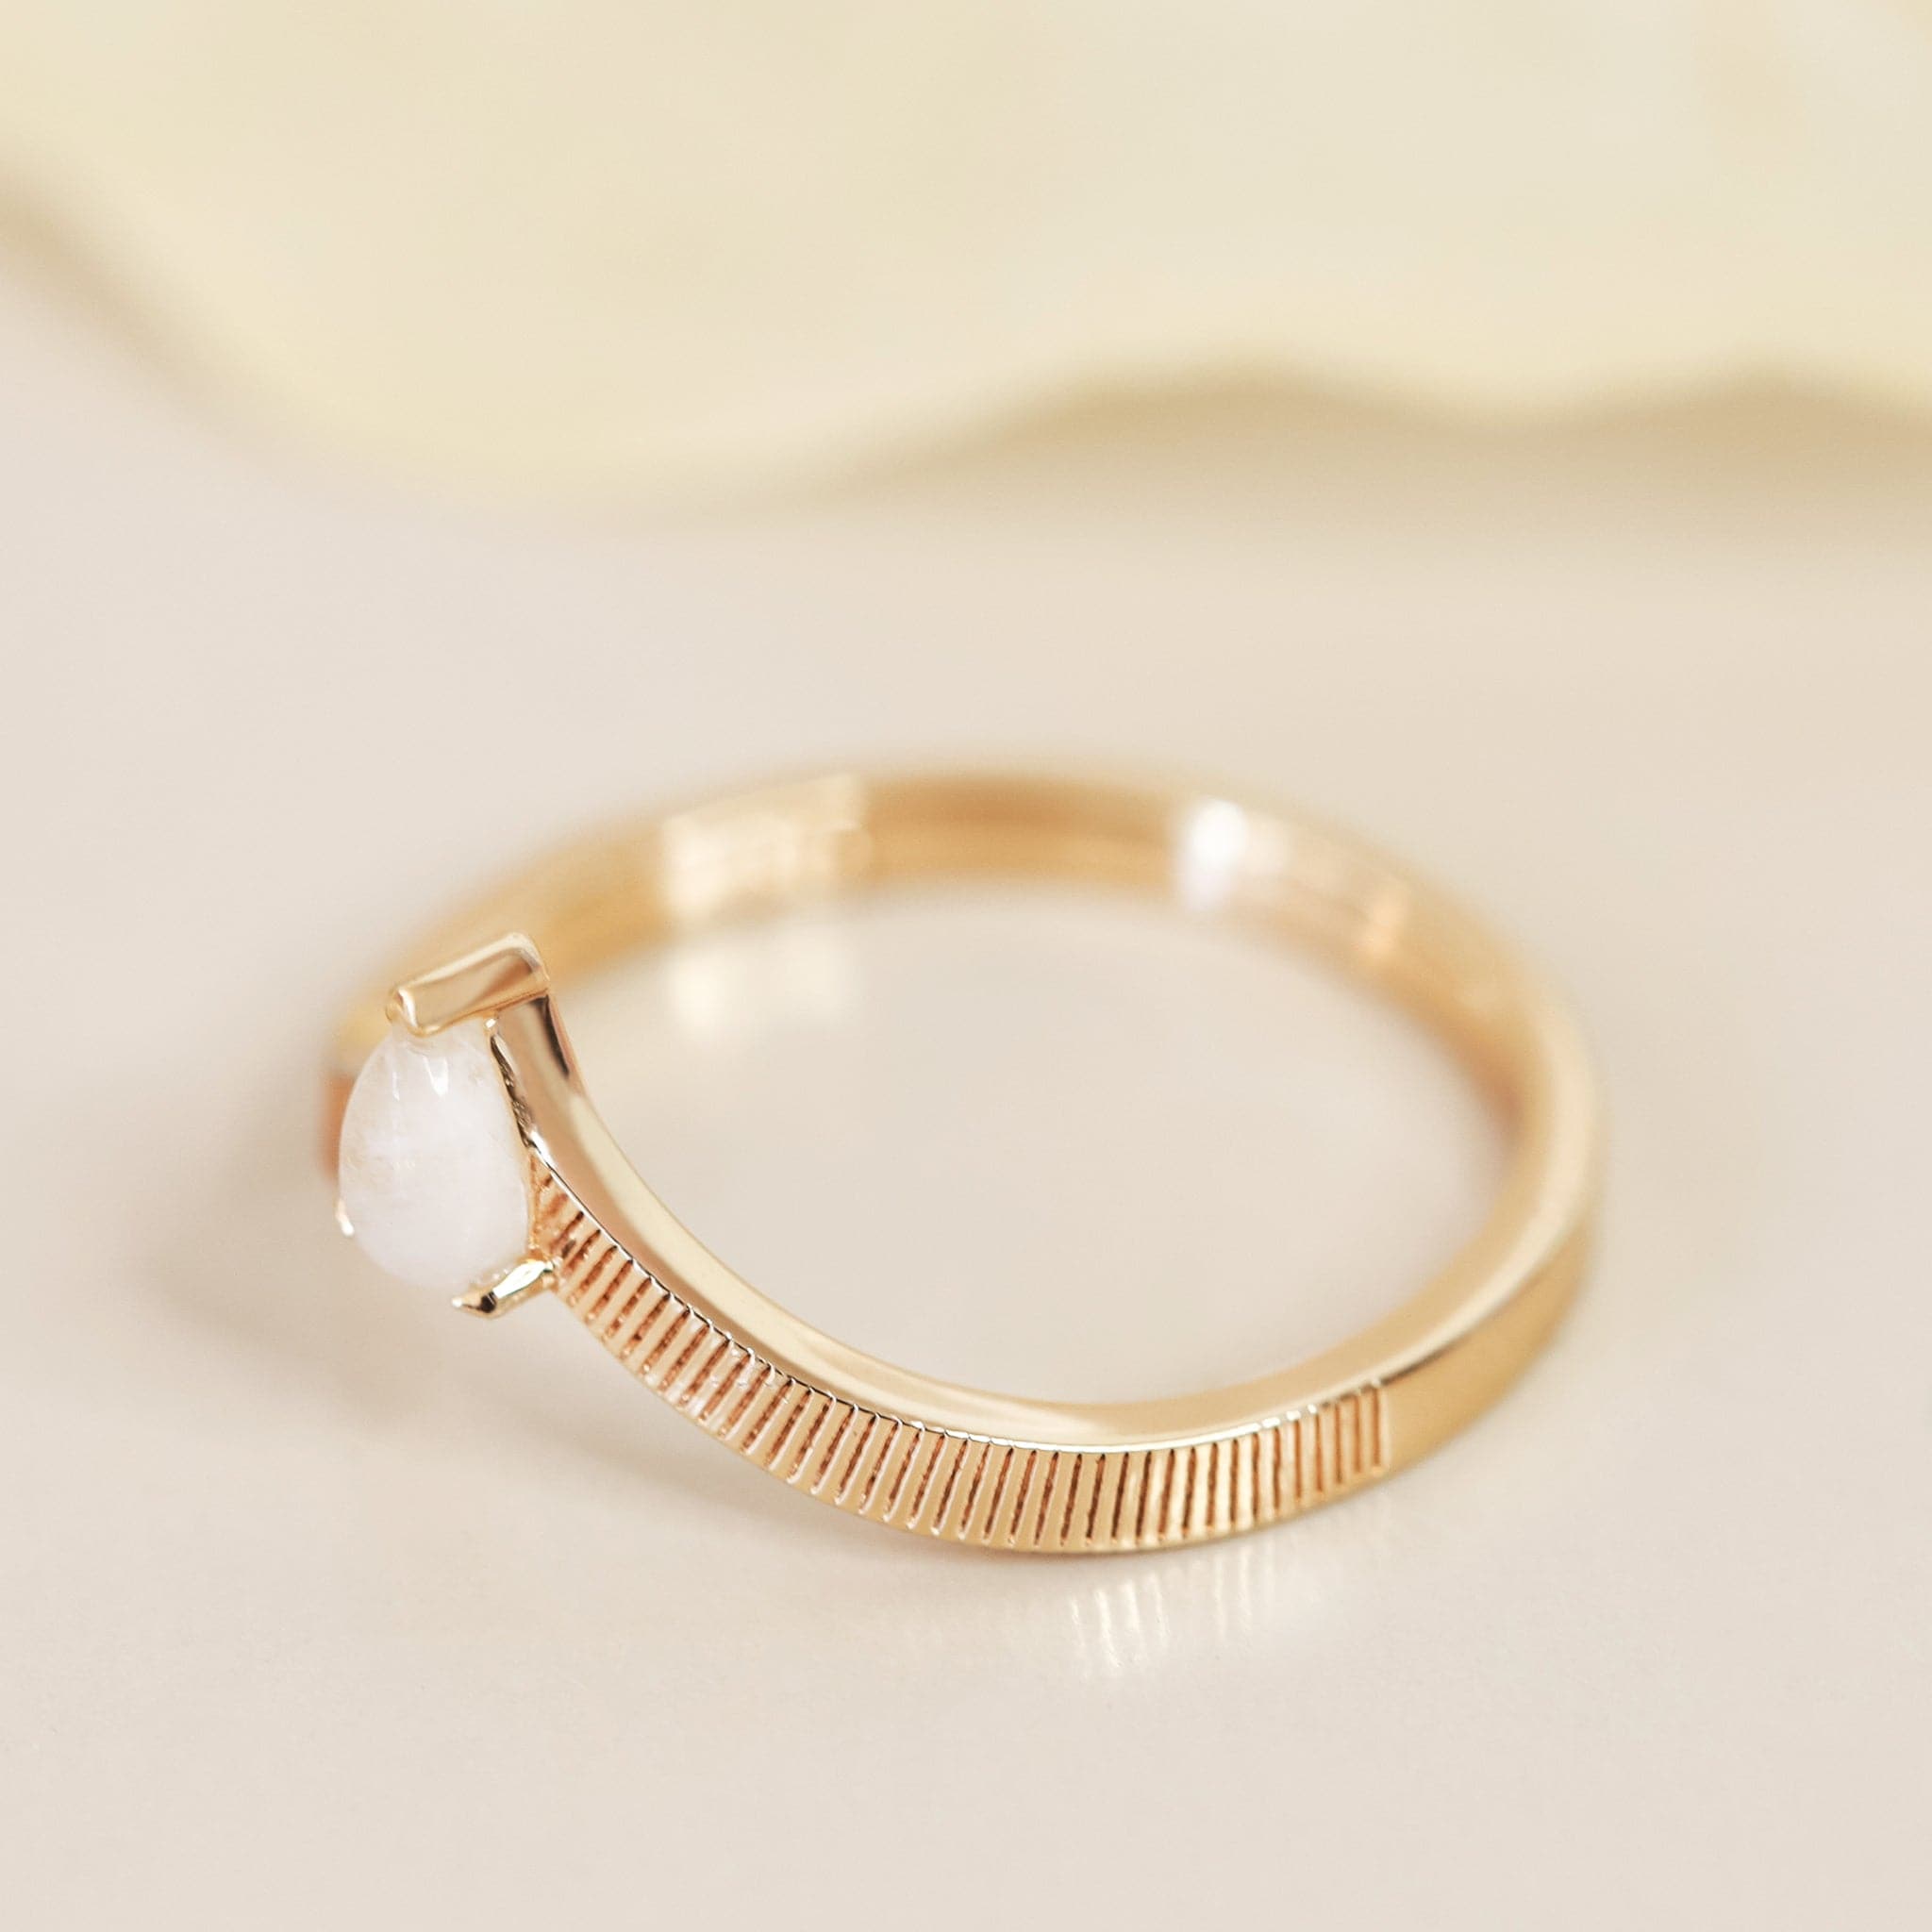 A gold band ring with etched line detailing and a white moonstone in the center.